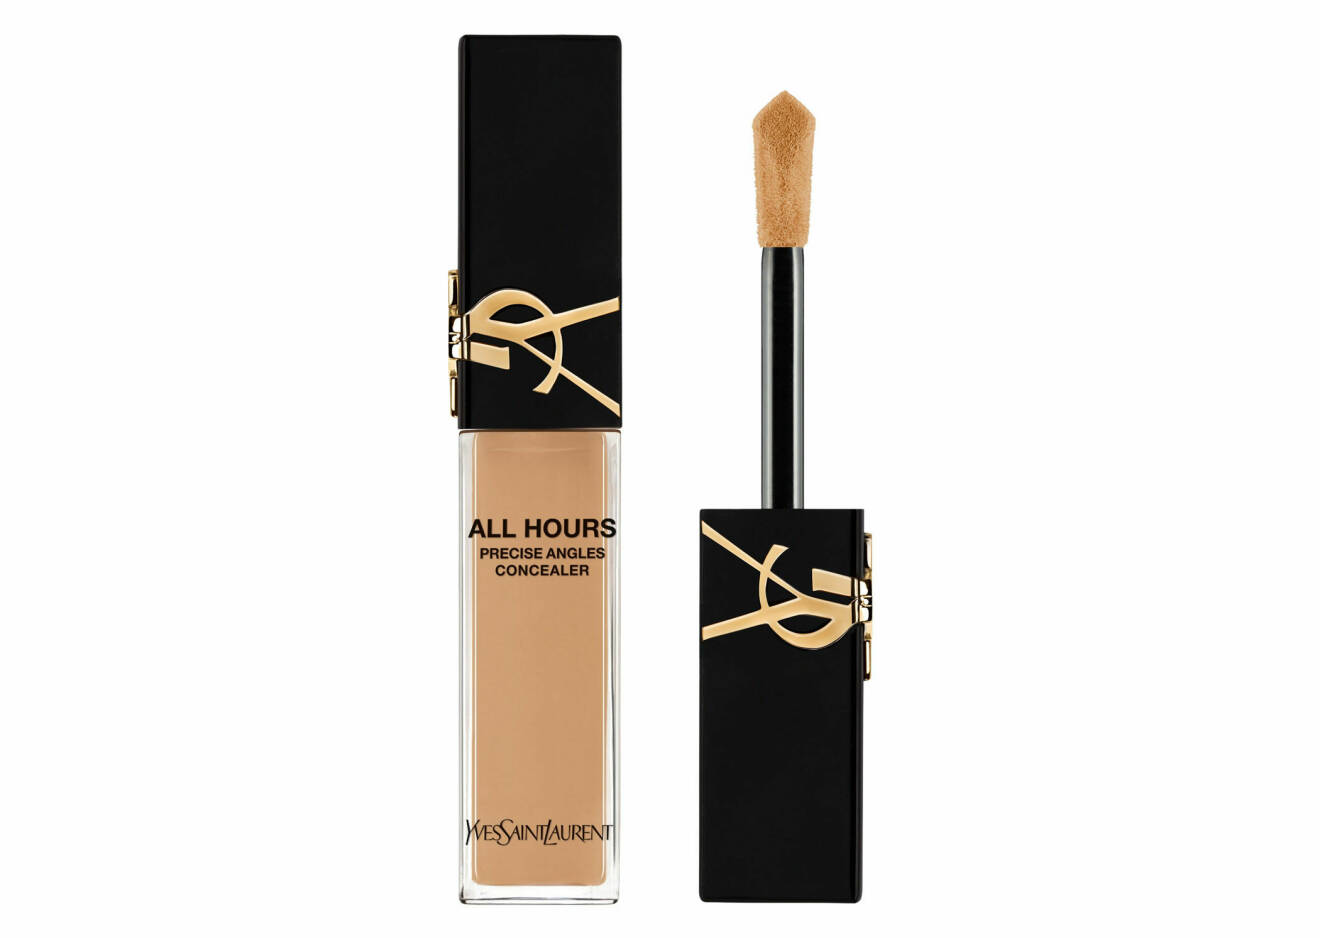 All Hours Precise Angles Concealer från YSL.